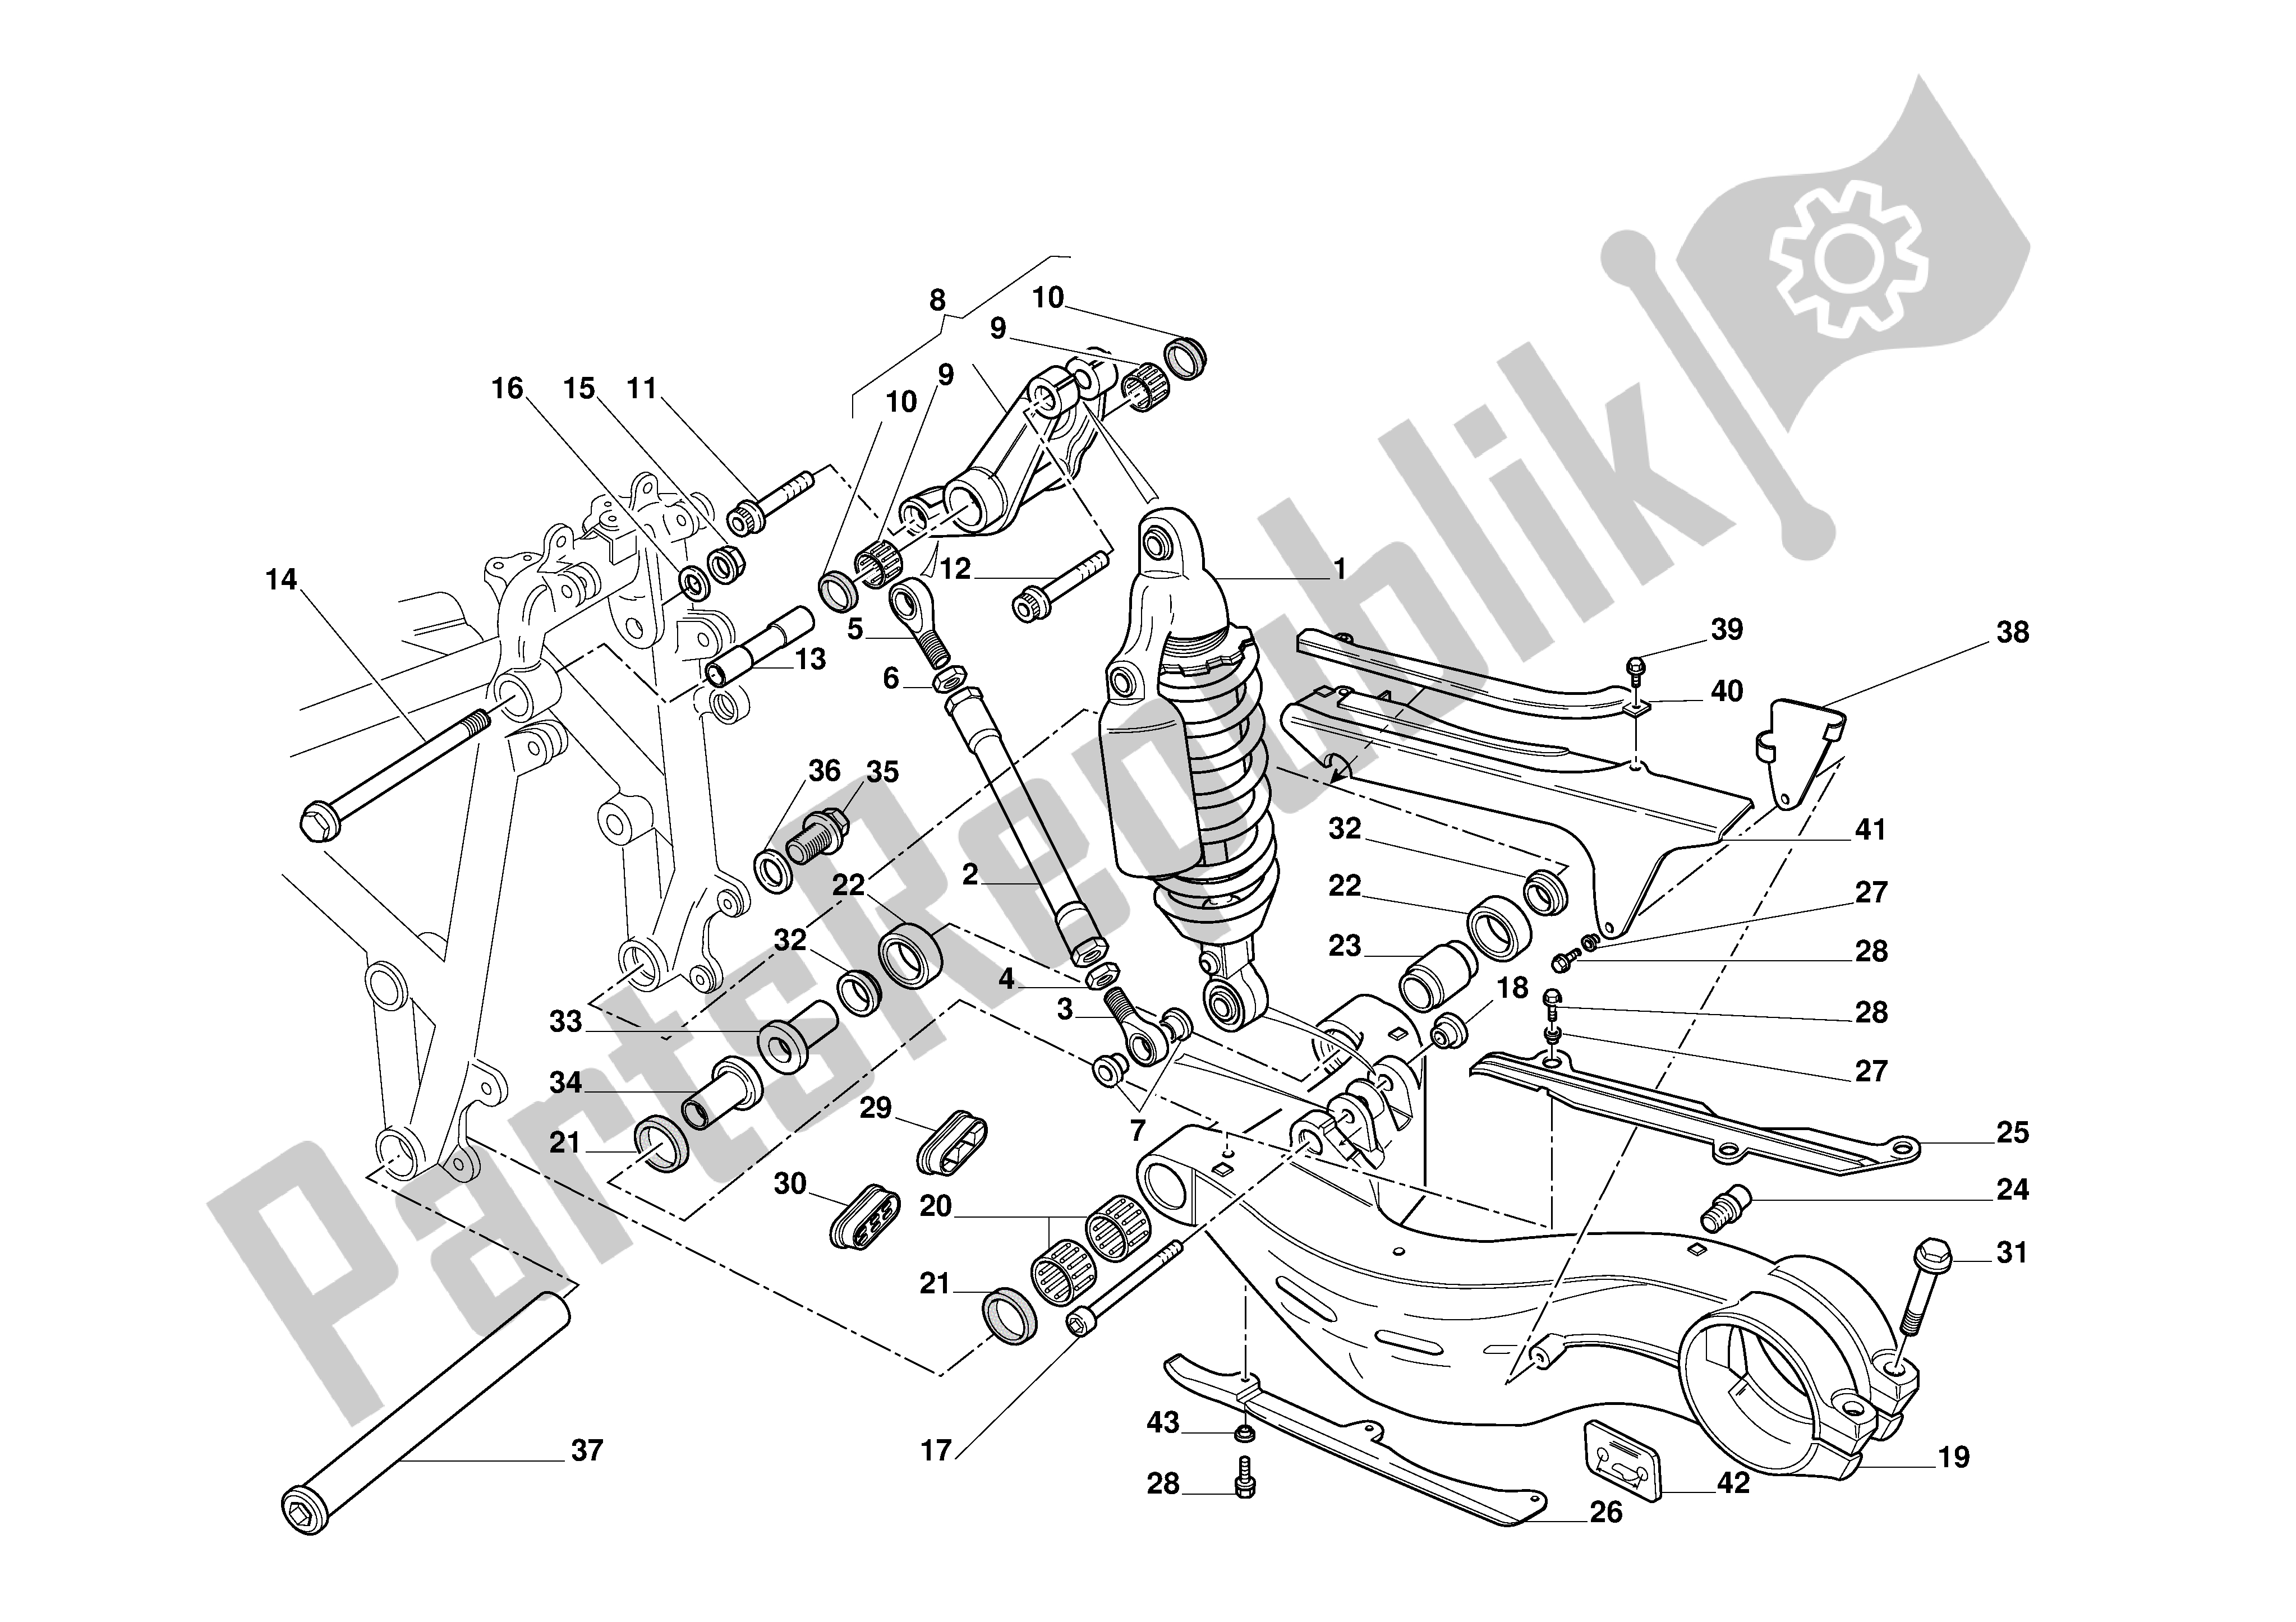 All parts for the Rear Suspension of the Ducati 748 2001